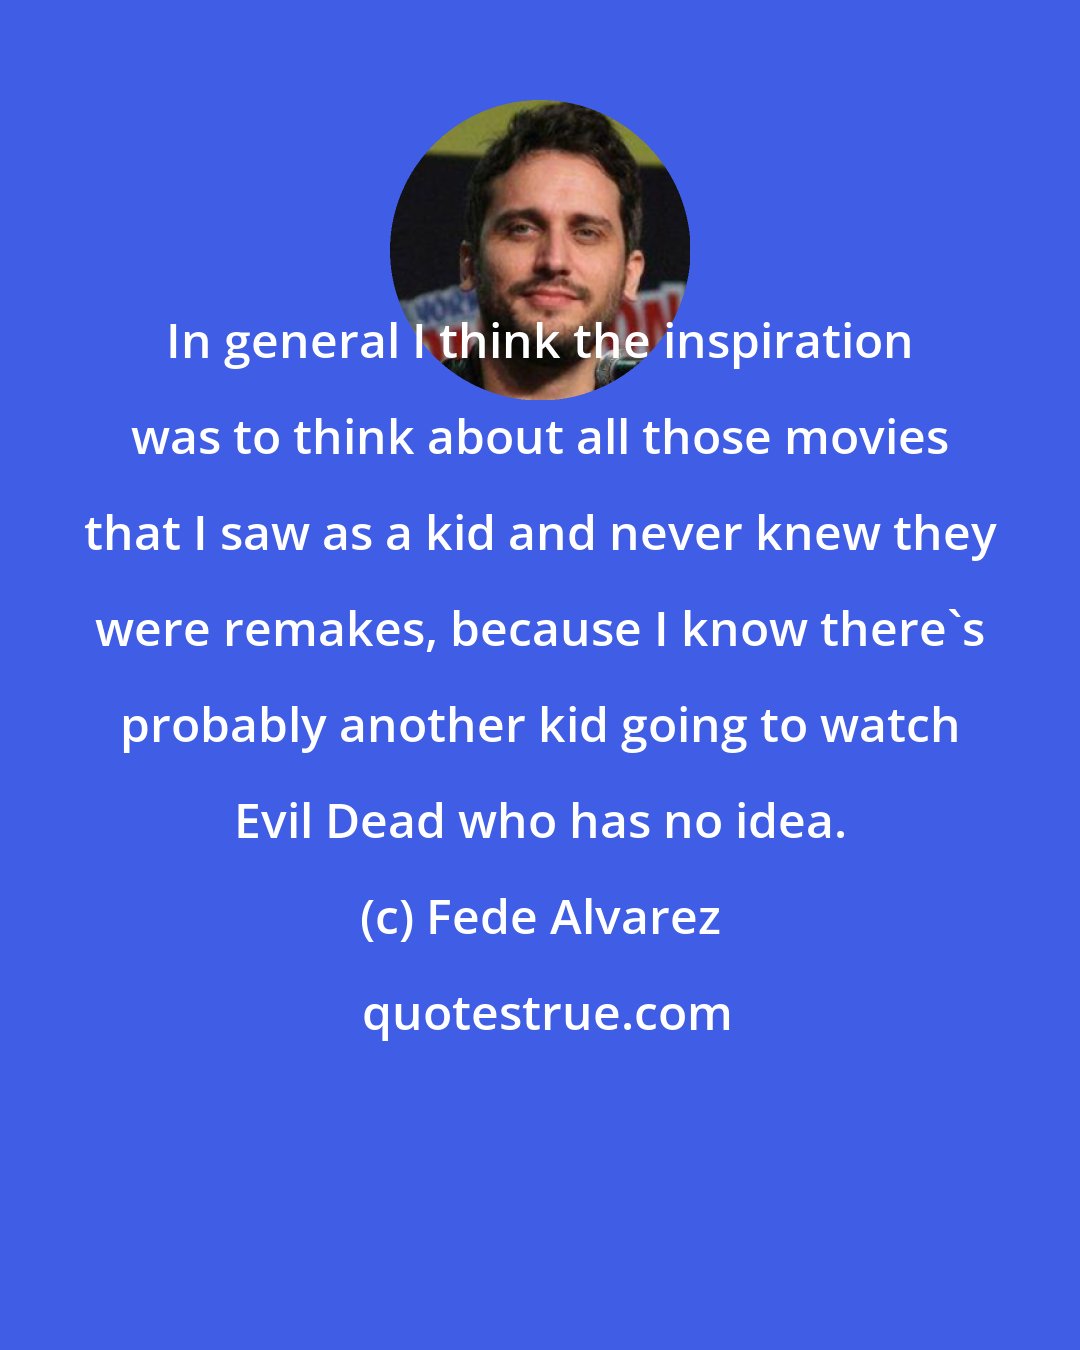 Fede Alvarez: In general I think the inspiration was to think about all those movies that I saw as a kid and never knew they were remakes, because I know there's probably another kid going to watch Evil Dead who has no idea.